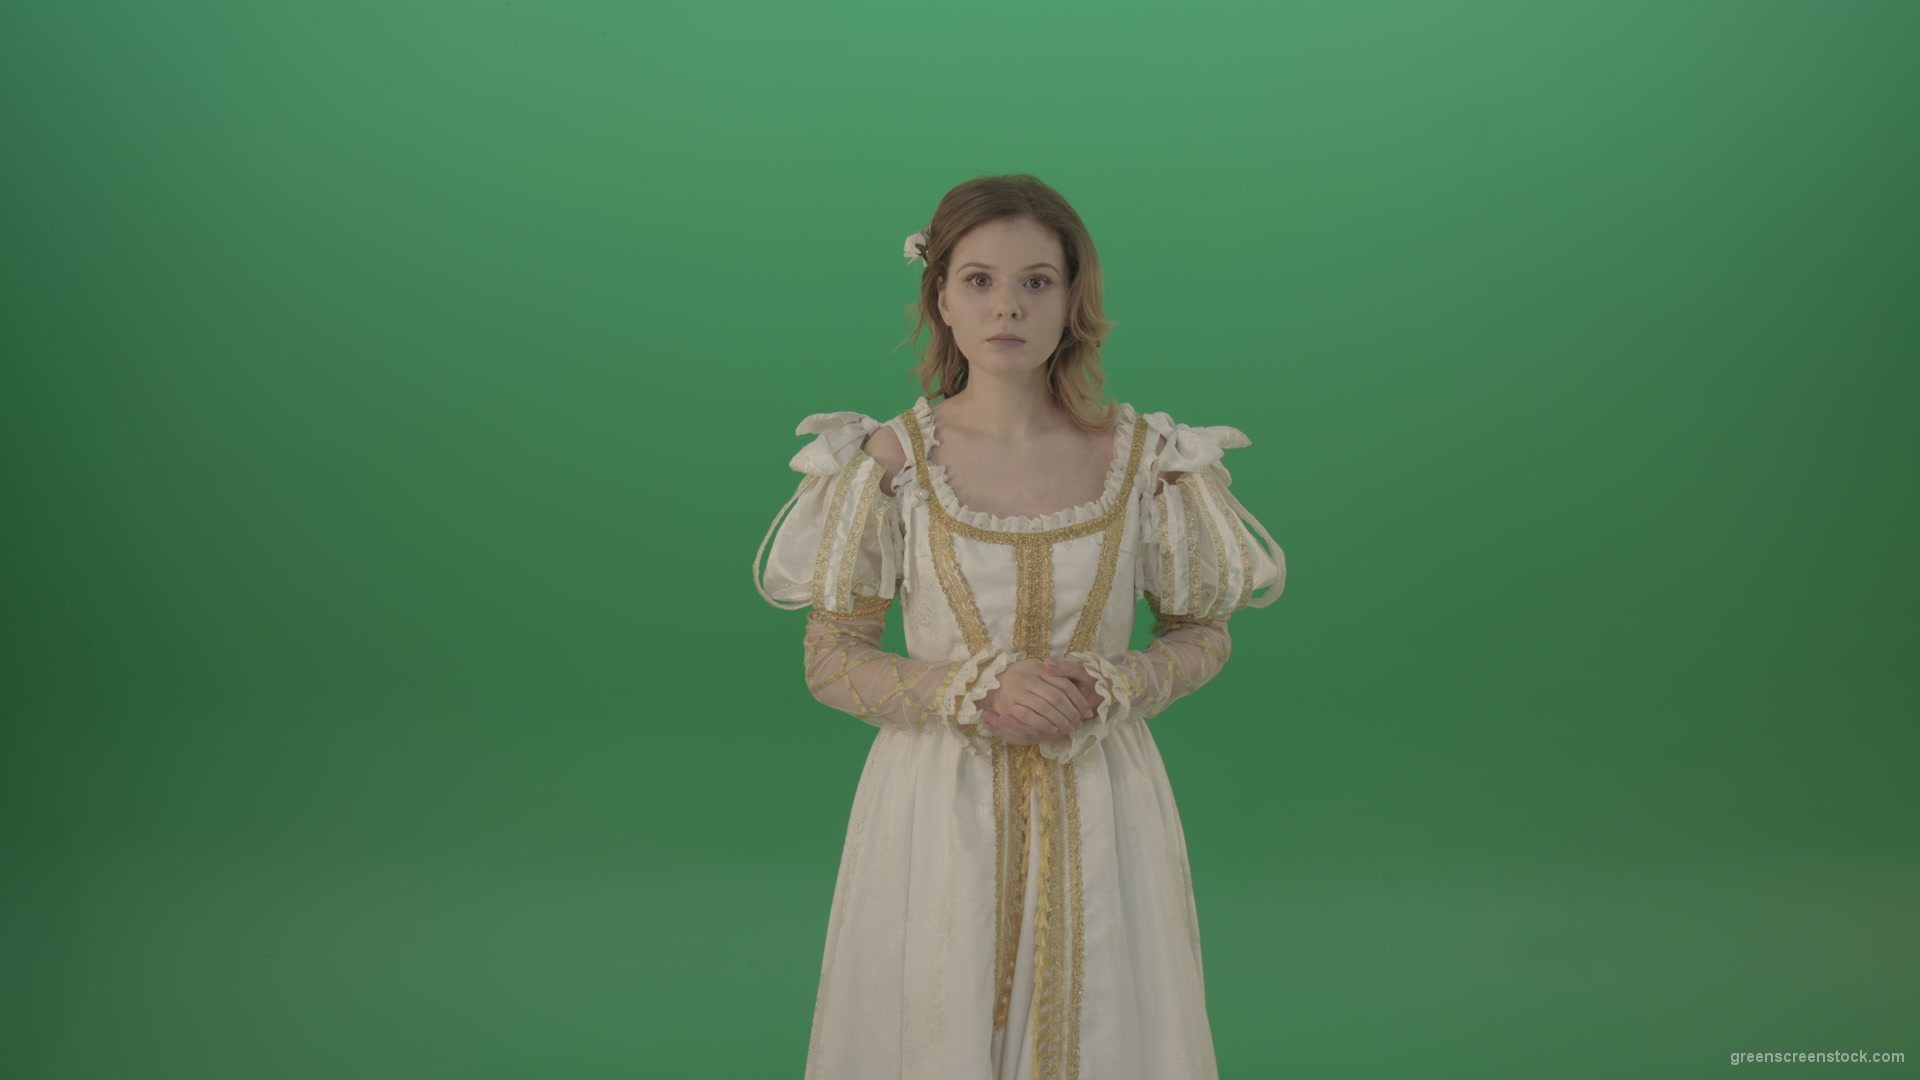 Girl-asks-to-be-quieter-in-a-white-dress-isolated-on-green-screen_004 Green Screen Stock